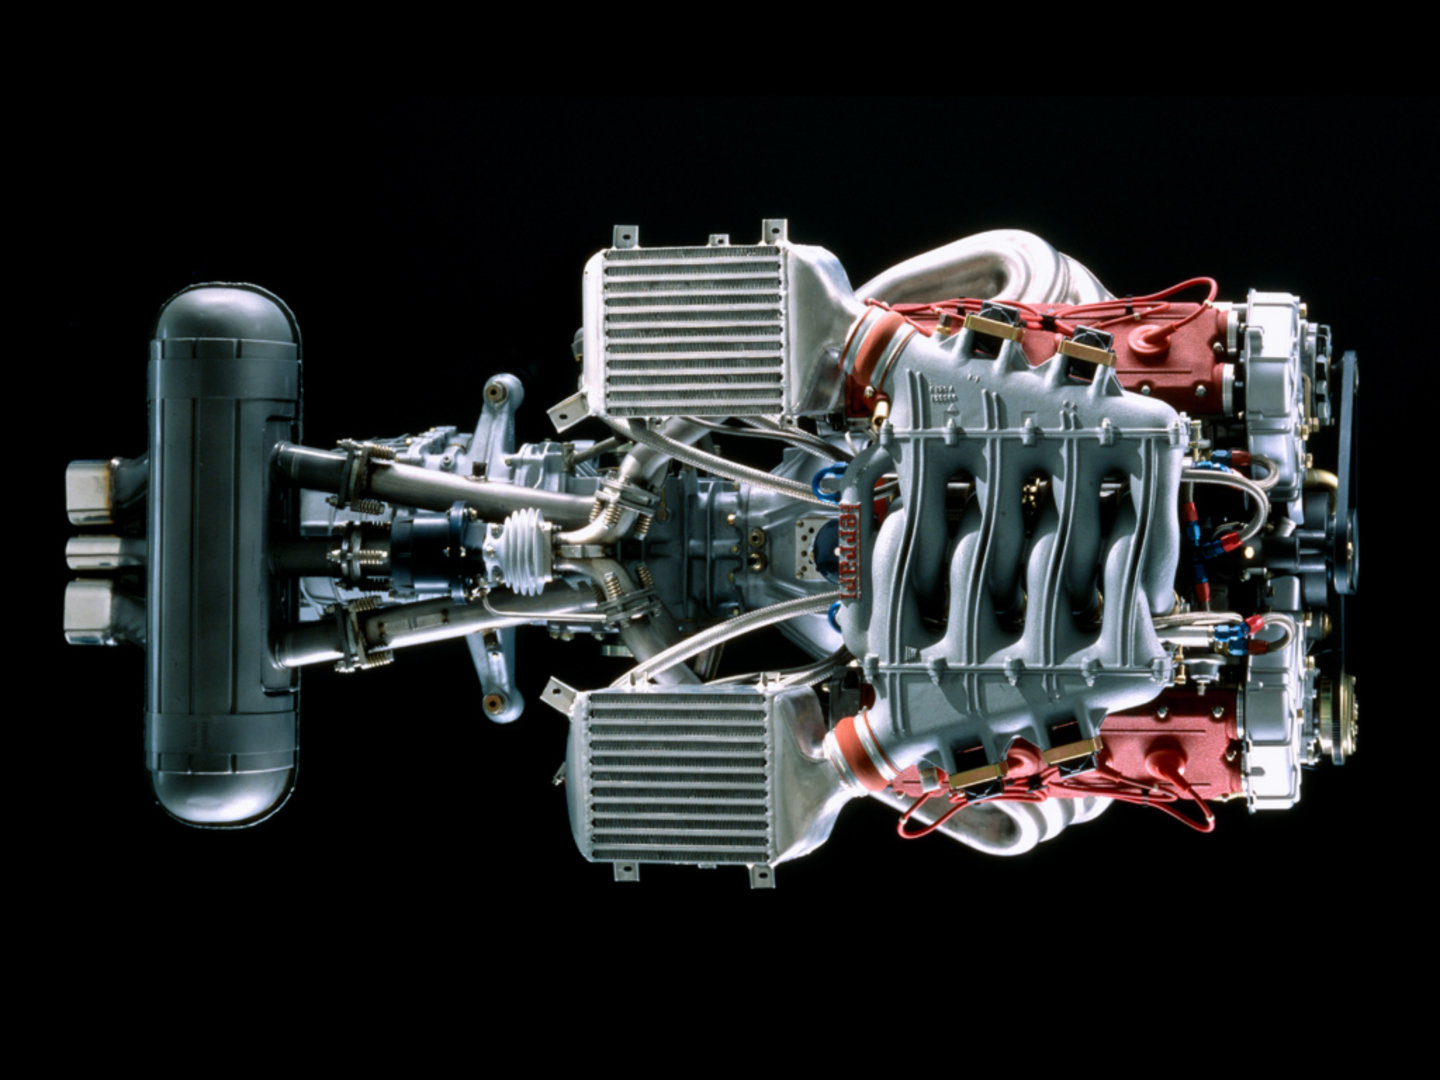 This Is What The Guts Of A Ferrari F40 Look Like